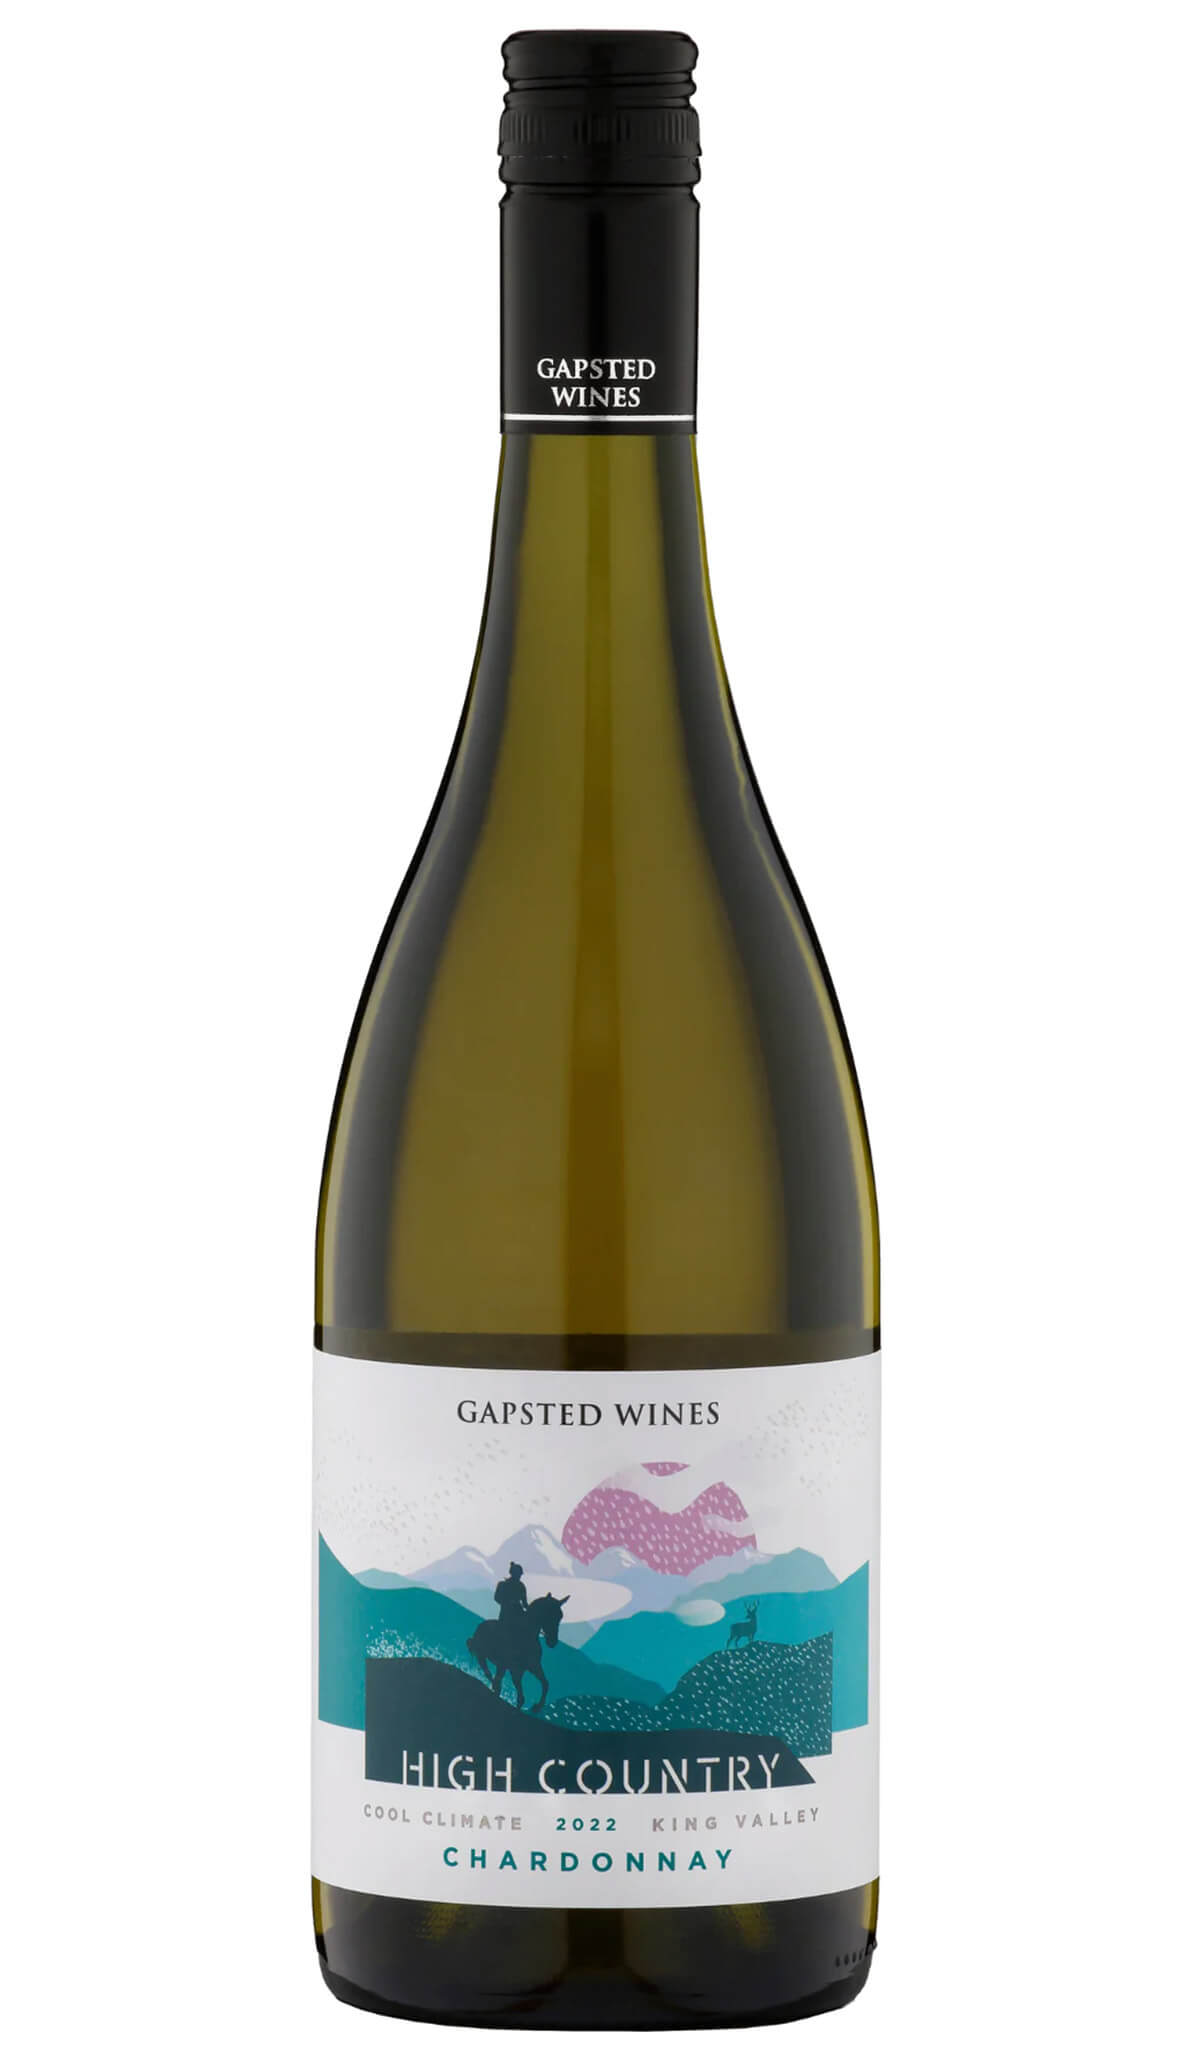 Find out more or buy Gapsted High Country Chardonnay 2022 (King Valley) online at Wine Sellers Direct - Australia’s independent liquor specialists.